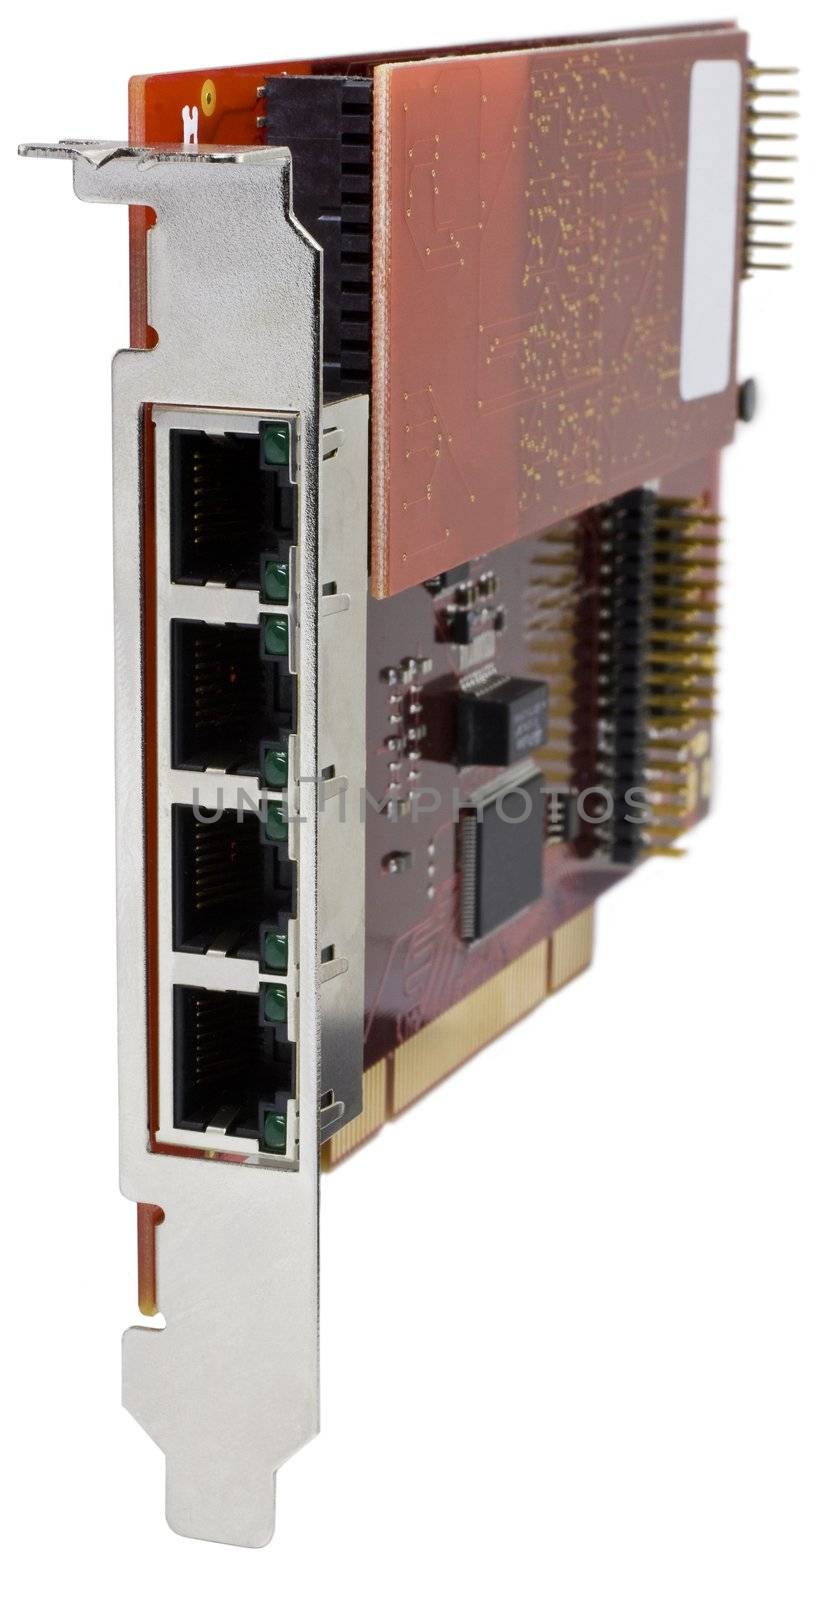 Firewire 800 Card for server computers by gewoldi